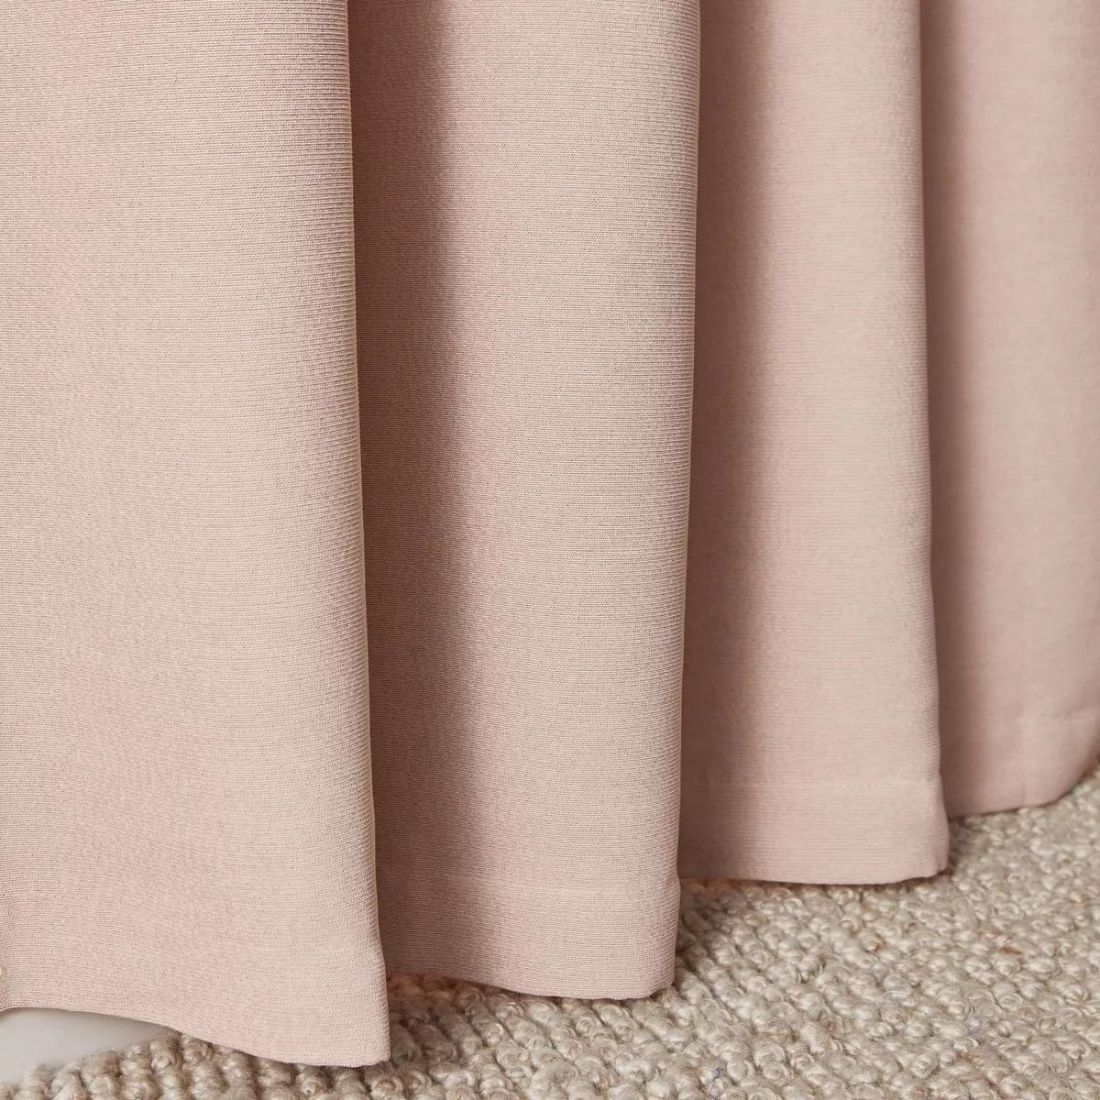 Pair of Pink Blackout Curtains with Rings